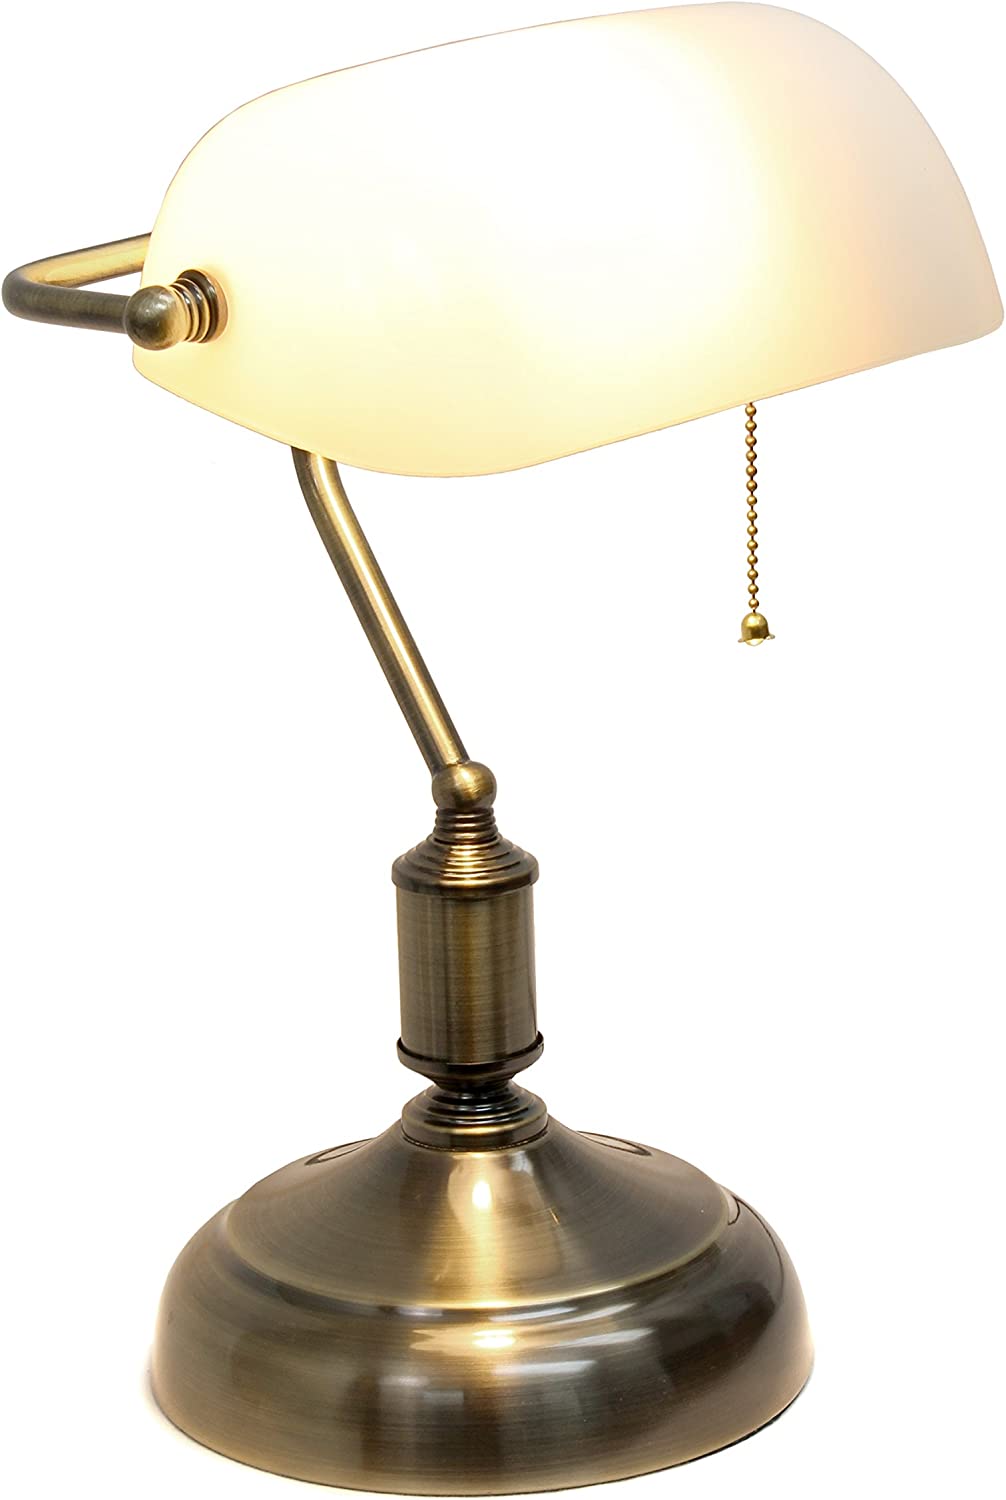 Simple Designs LT3216-WHT Executive Banker's Glass Shade, Desk Lamp, Antique Nickel/White